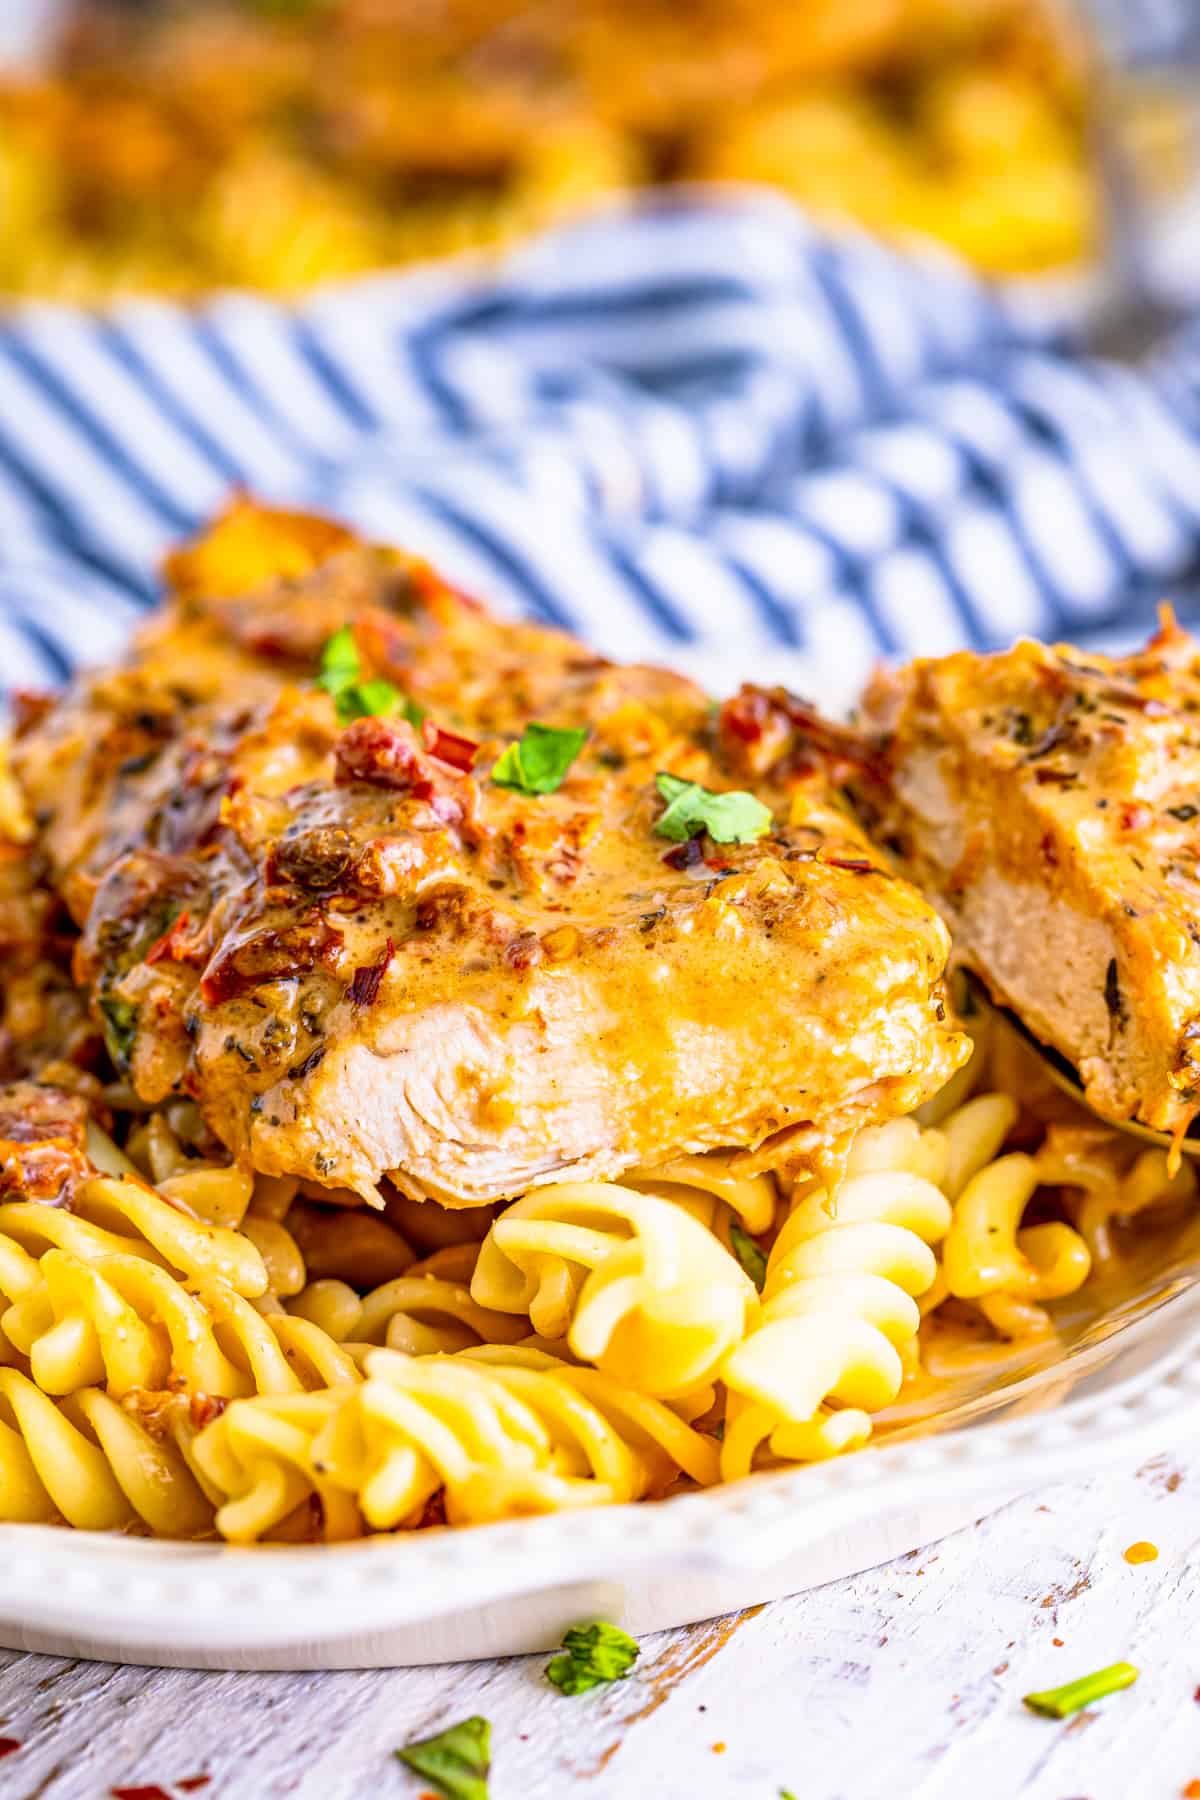 Chicken over noodles cut so you can see the juicy cooked inside.